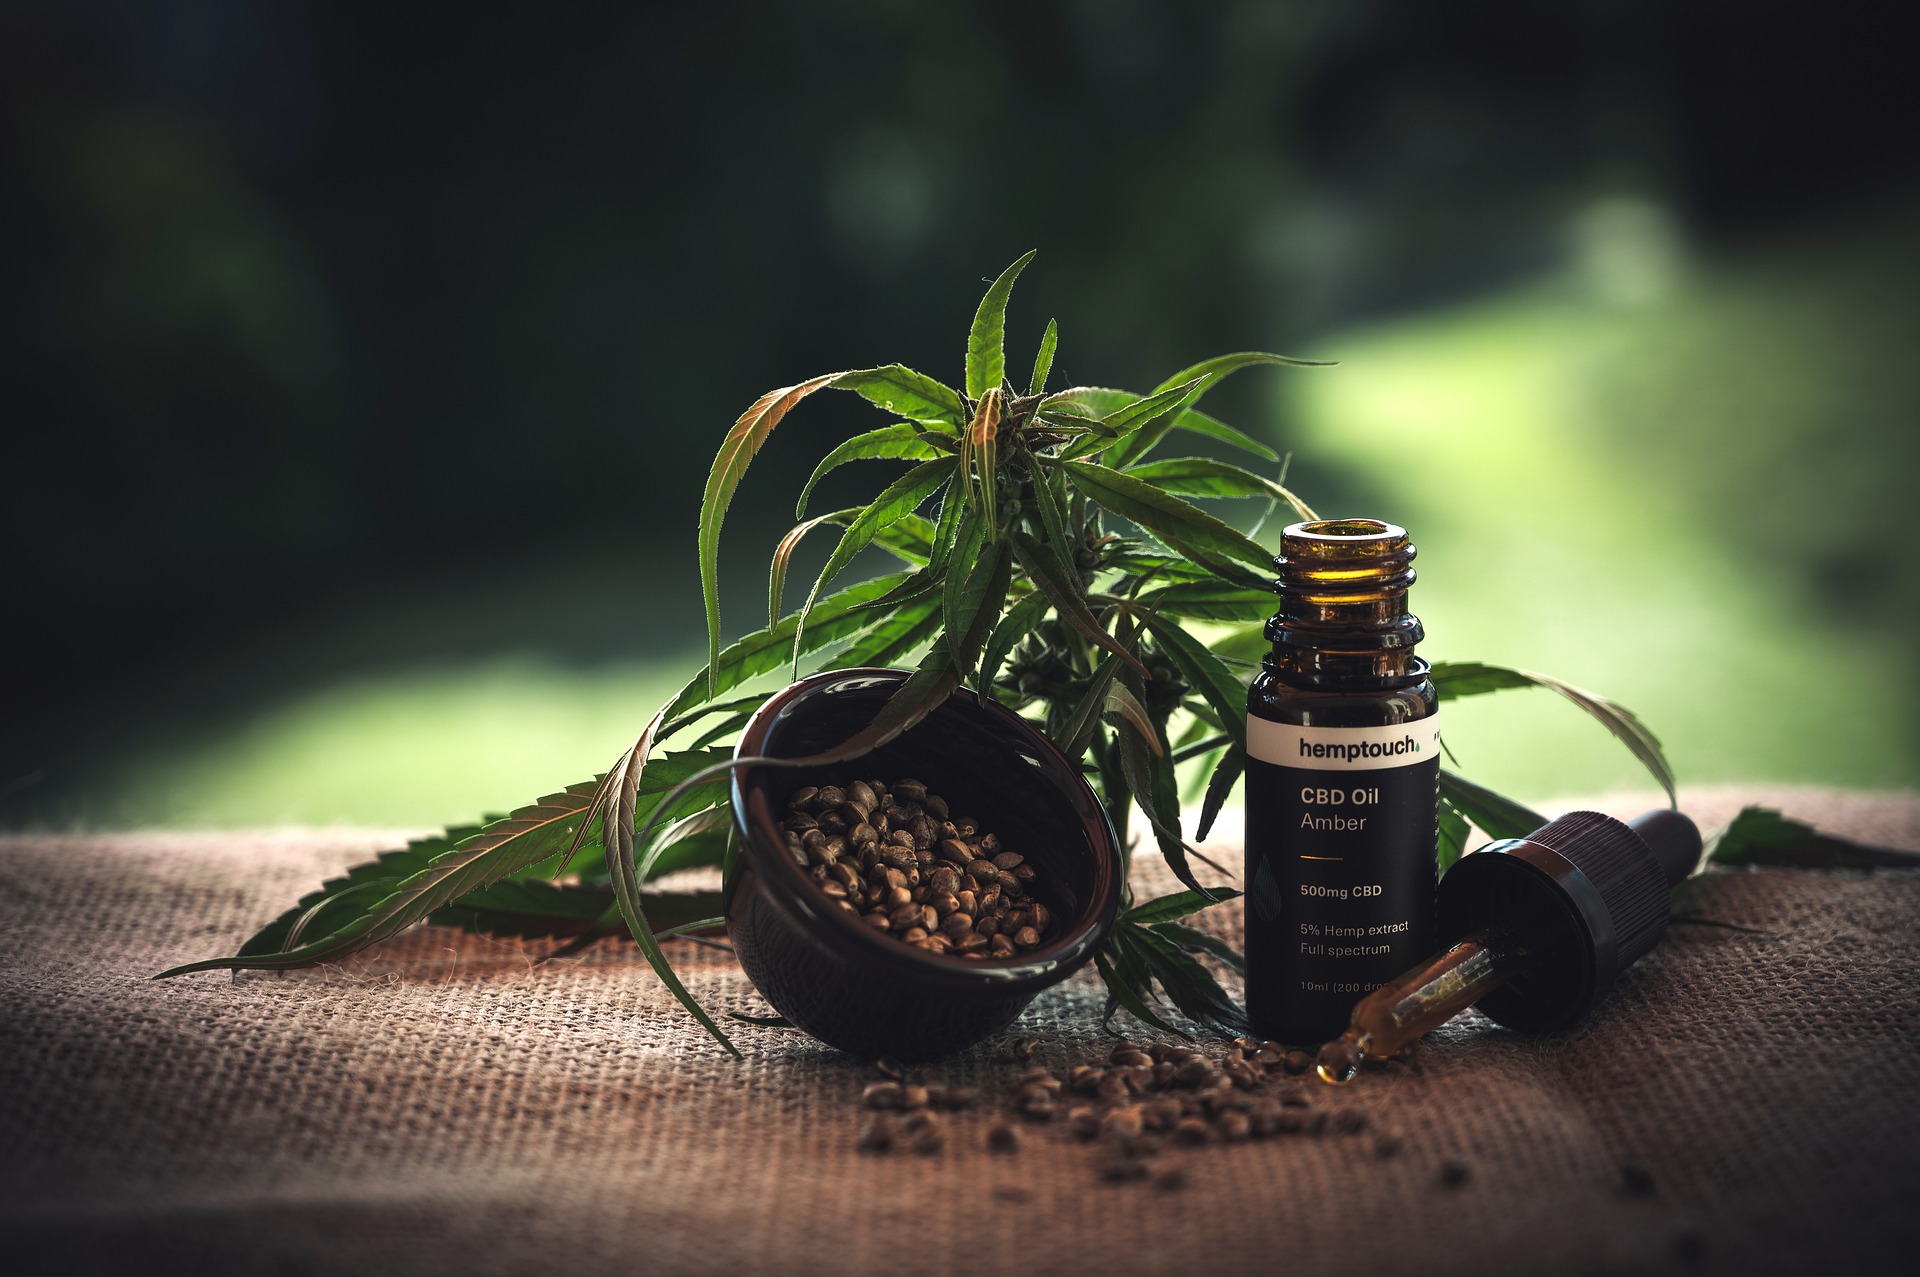 CBD oil a new trend among celebrities. What made it top of mind?